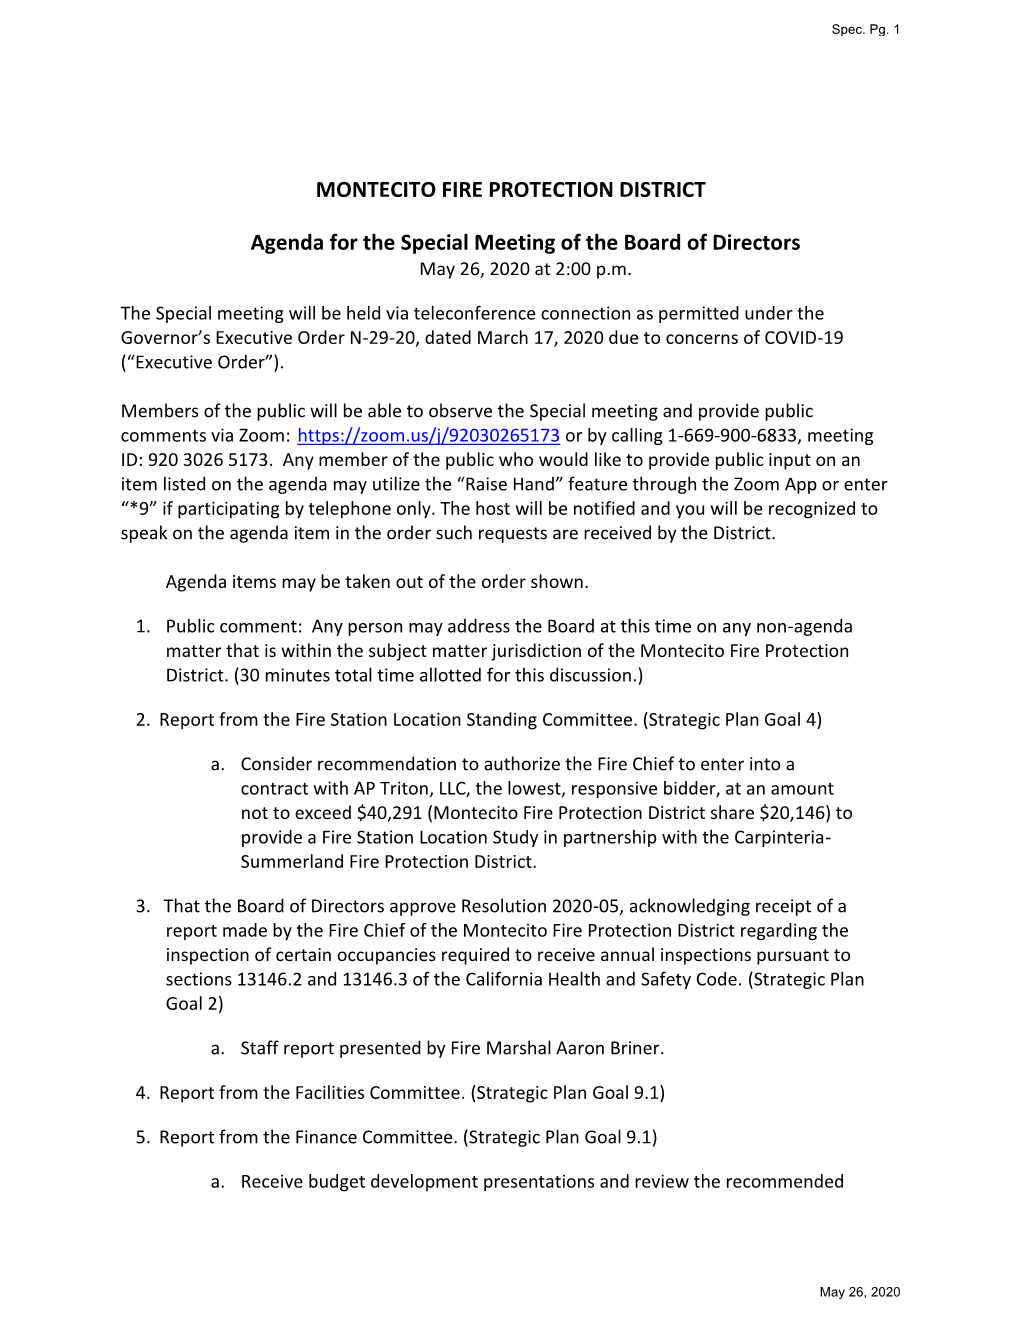 MONTECITO FIRE PROTECTION DISTRICT Agenda for the Special